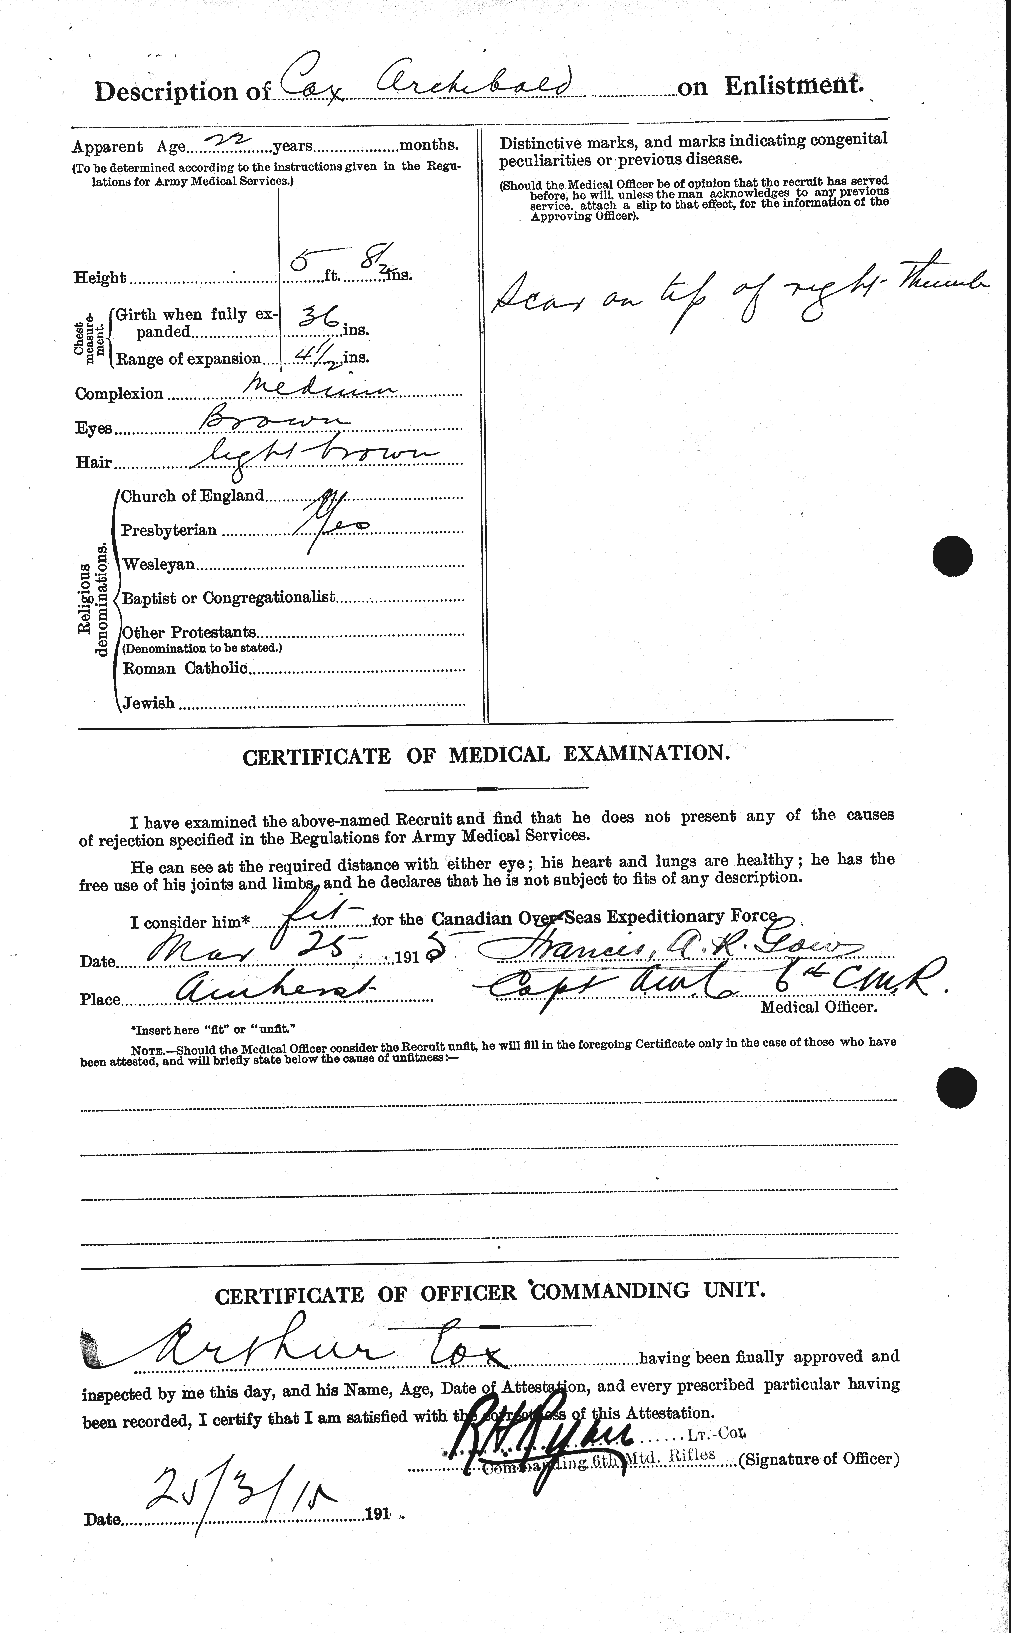 Personnel Records of the First World War - CEF 061452b